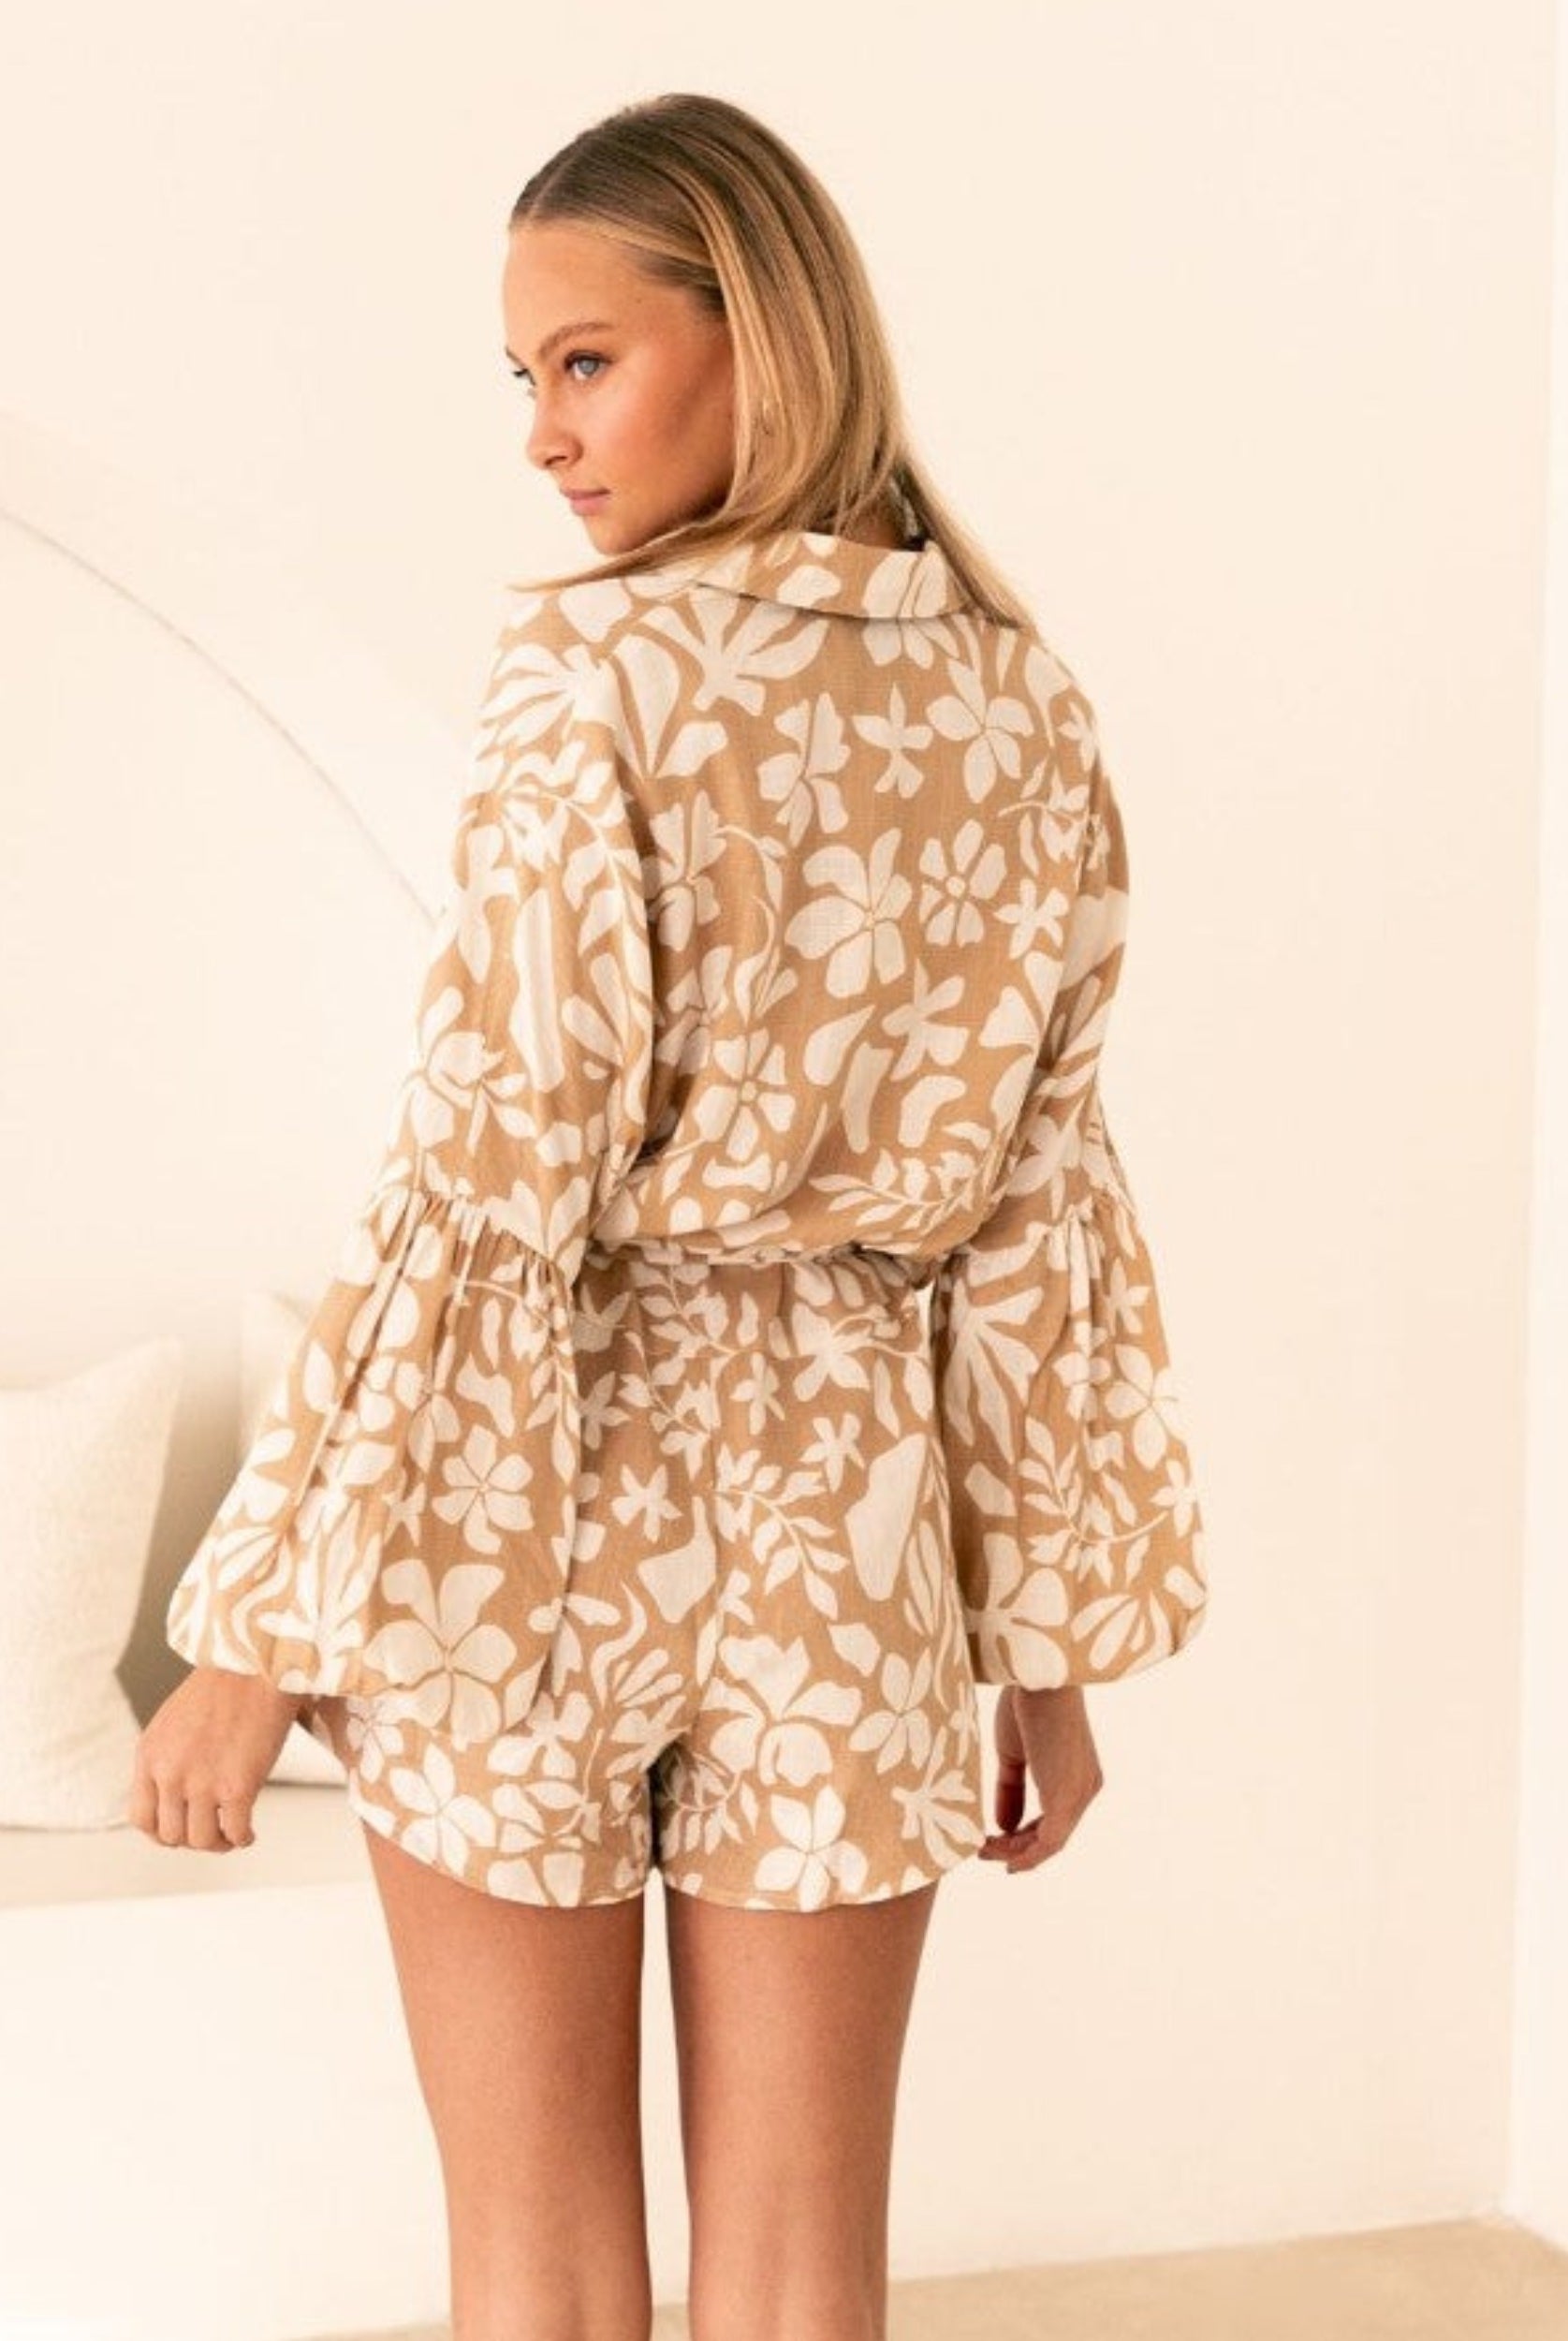 Courtney playsuit in neutral and white print